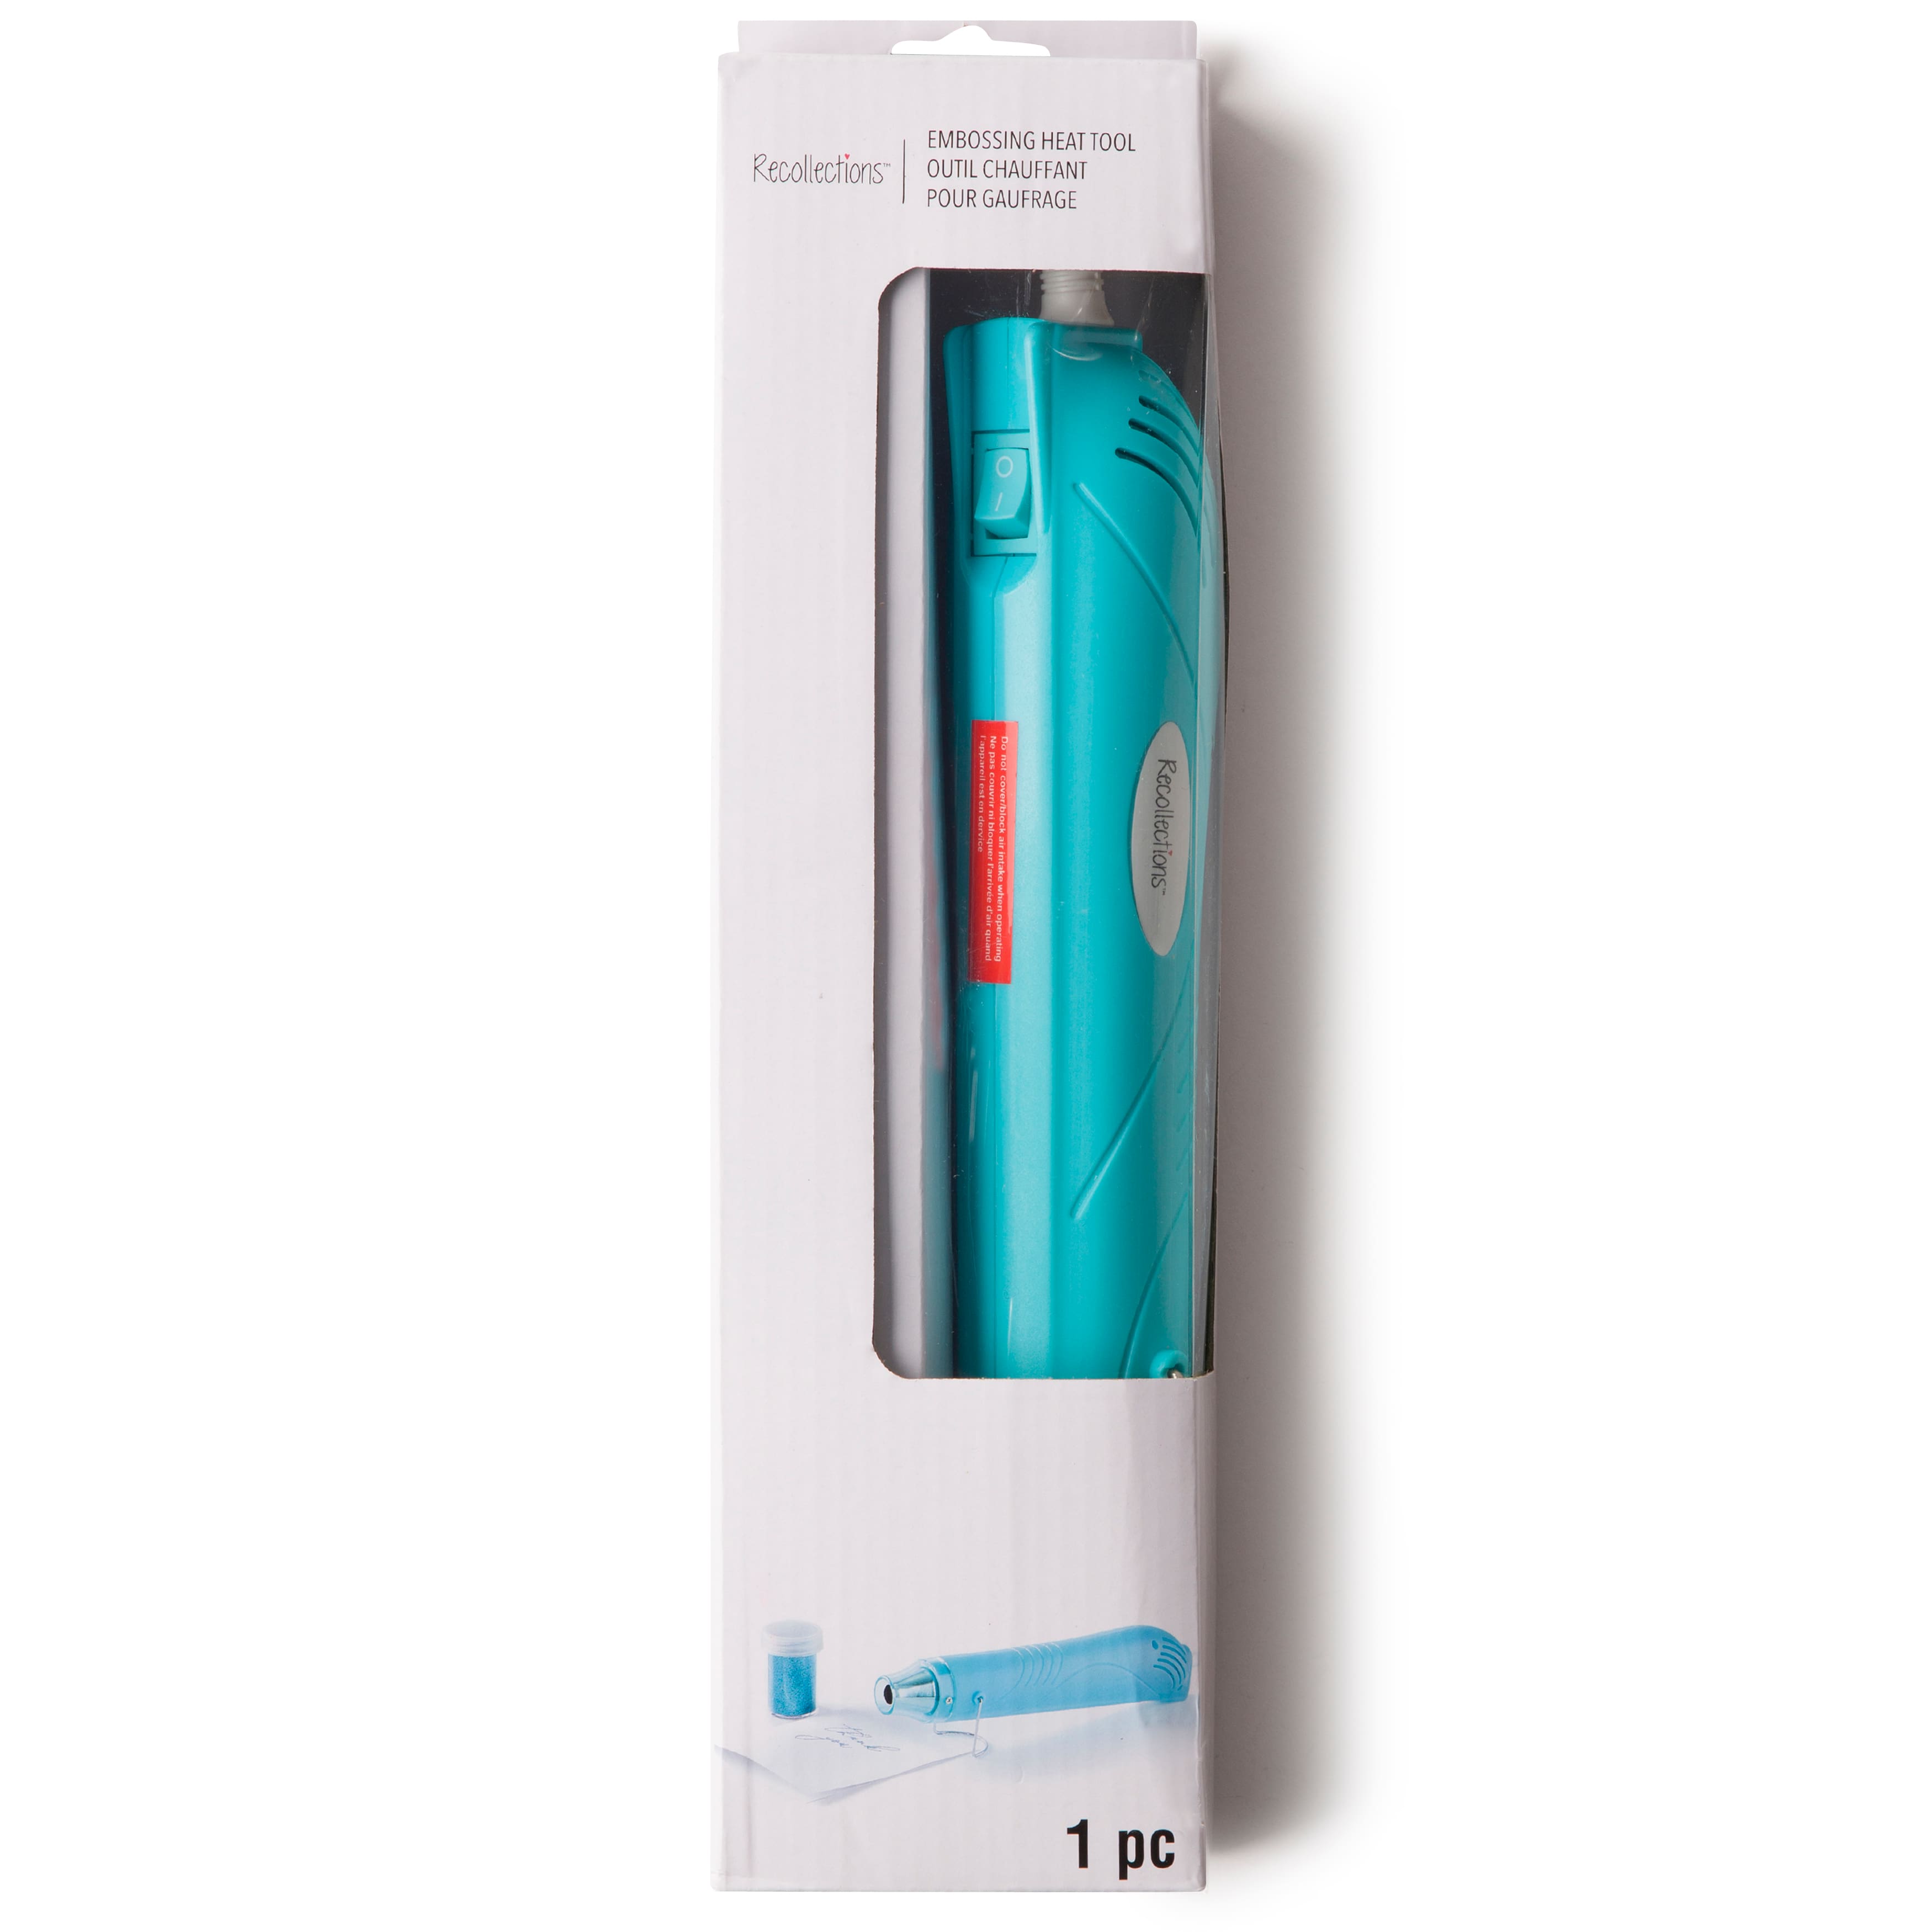 Teal Embossing Heat Tool by Recollections